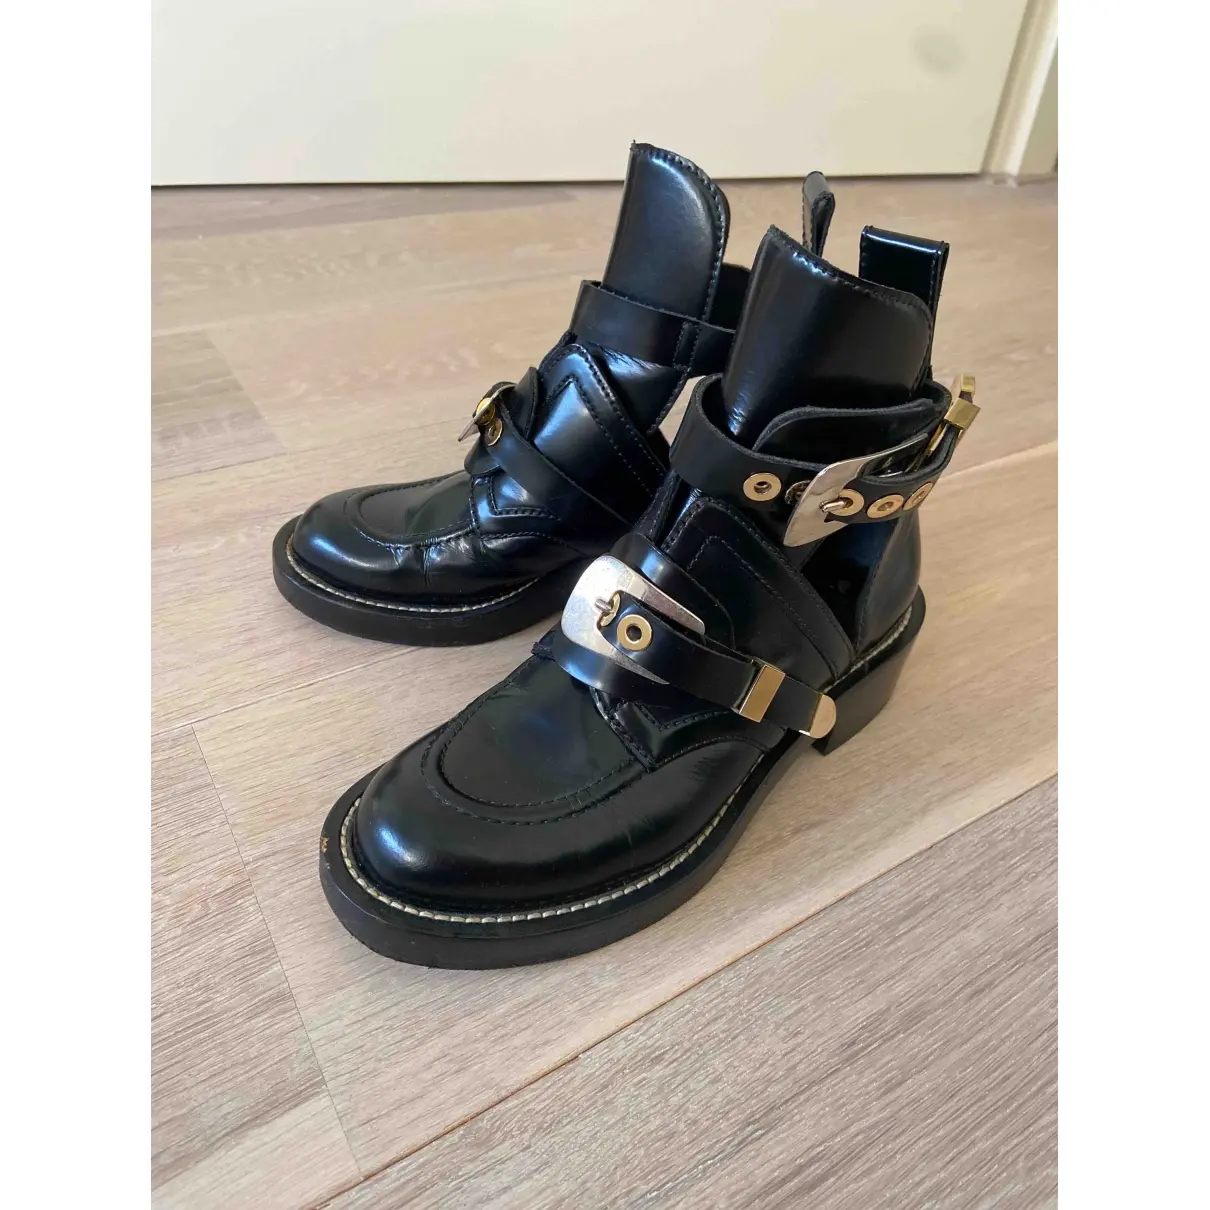 Balenciaga Ceinture leather buckled boots for sale